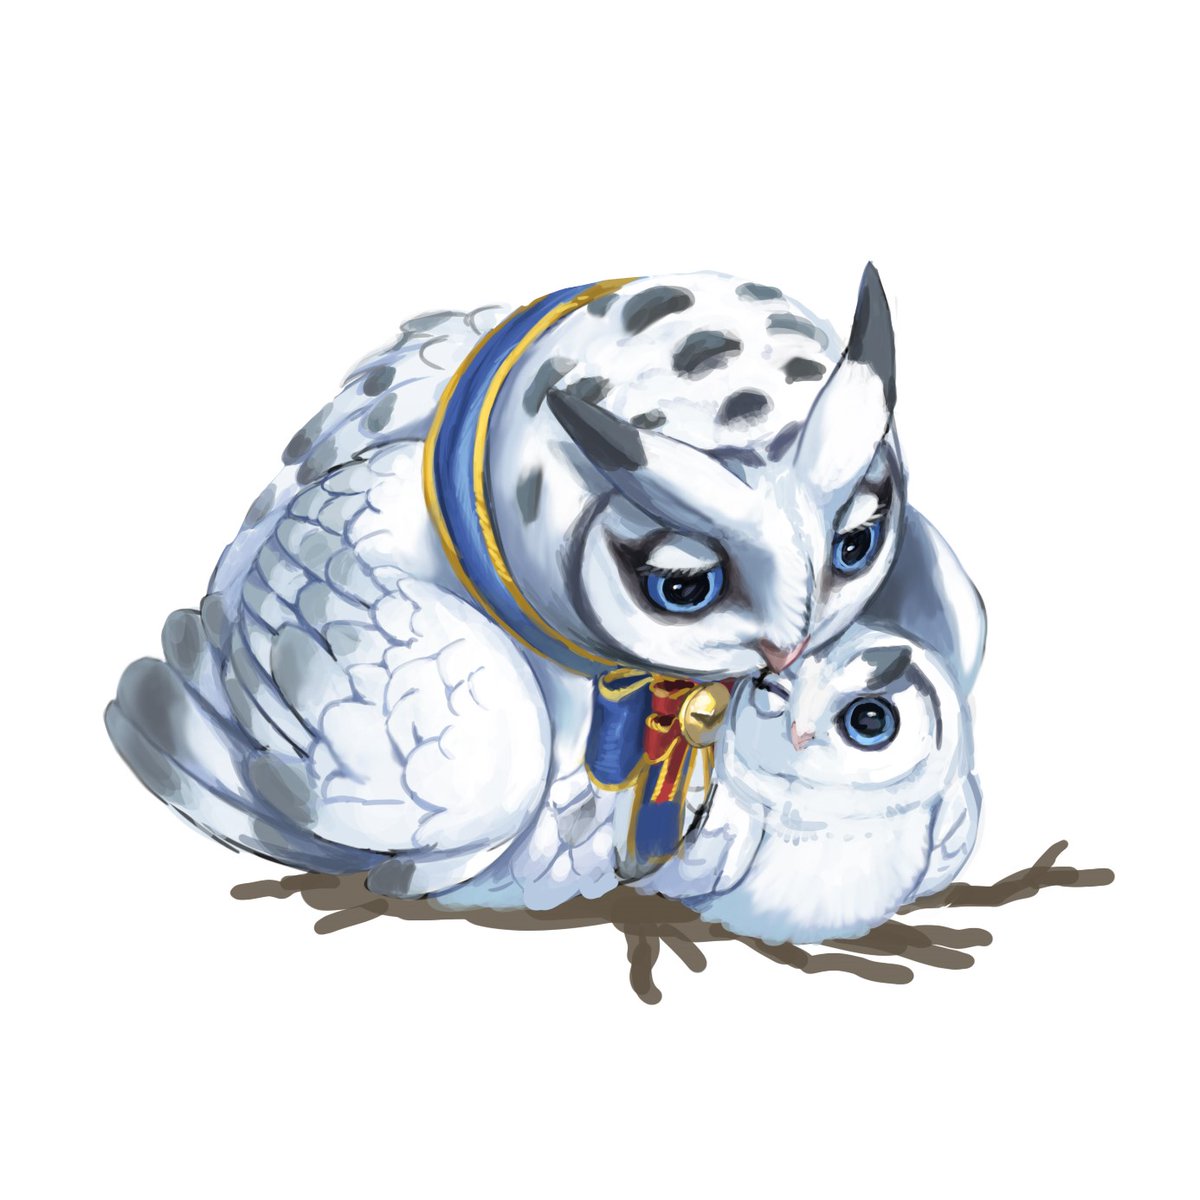 「❤️ Snowy Cohoot family ❤️

Enjoy this #S」|Monster Hunterのイラスト